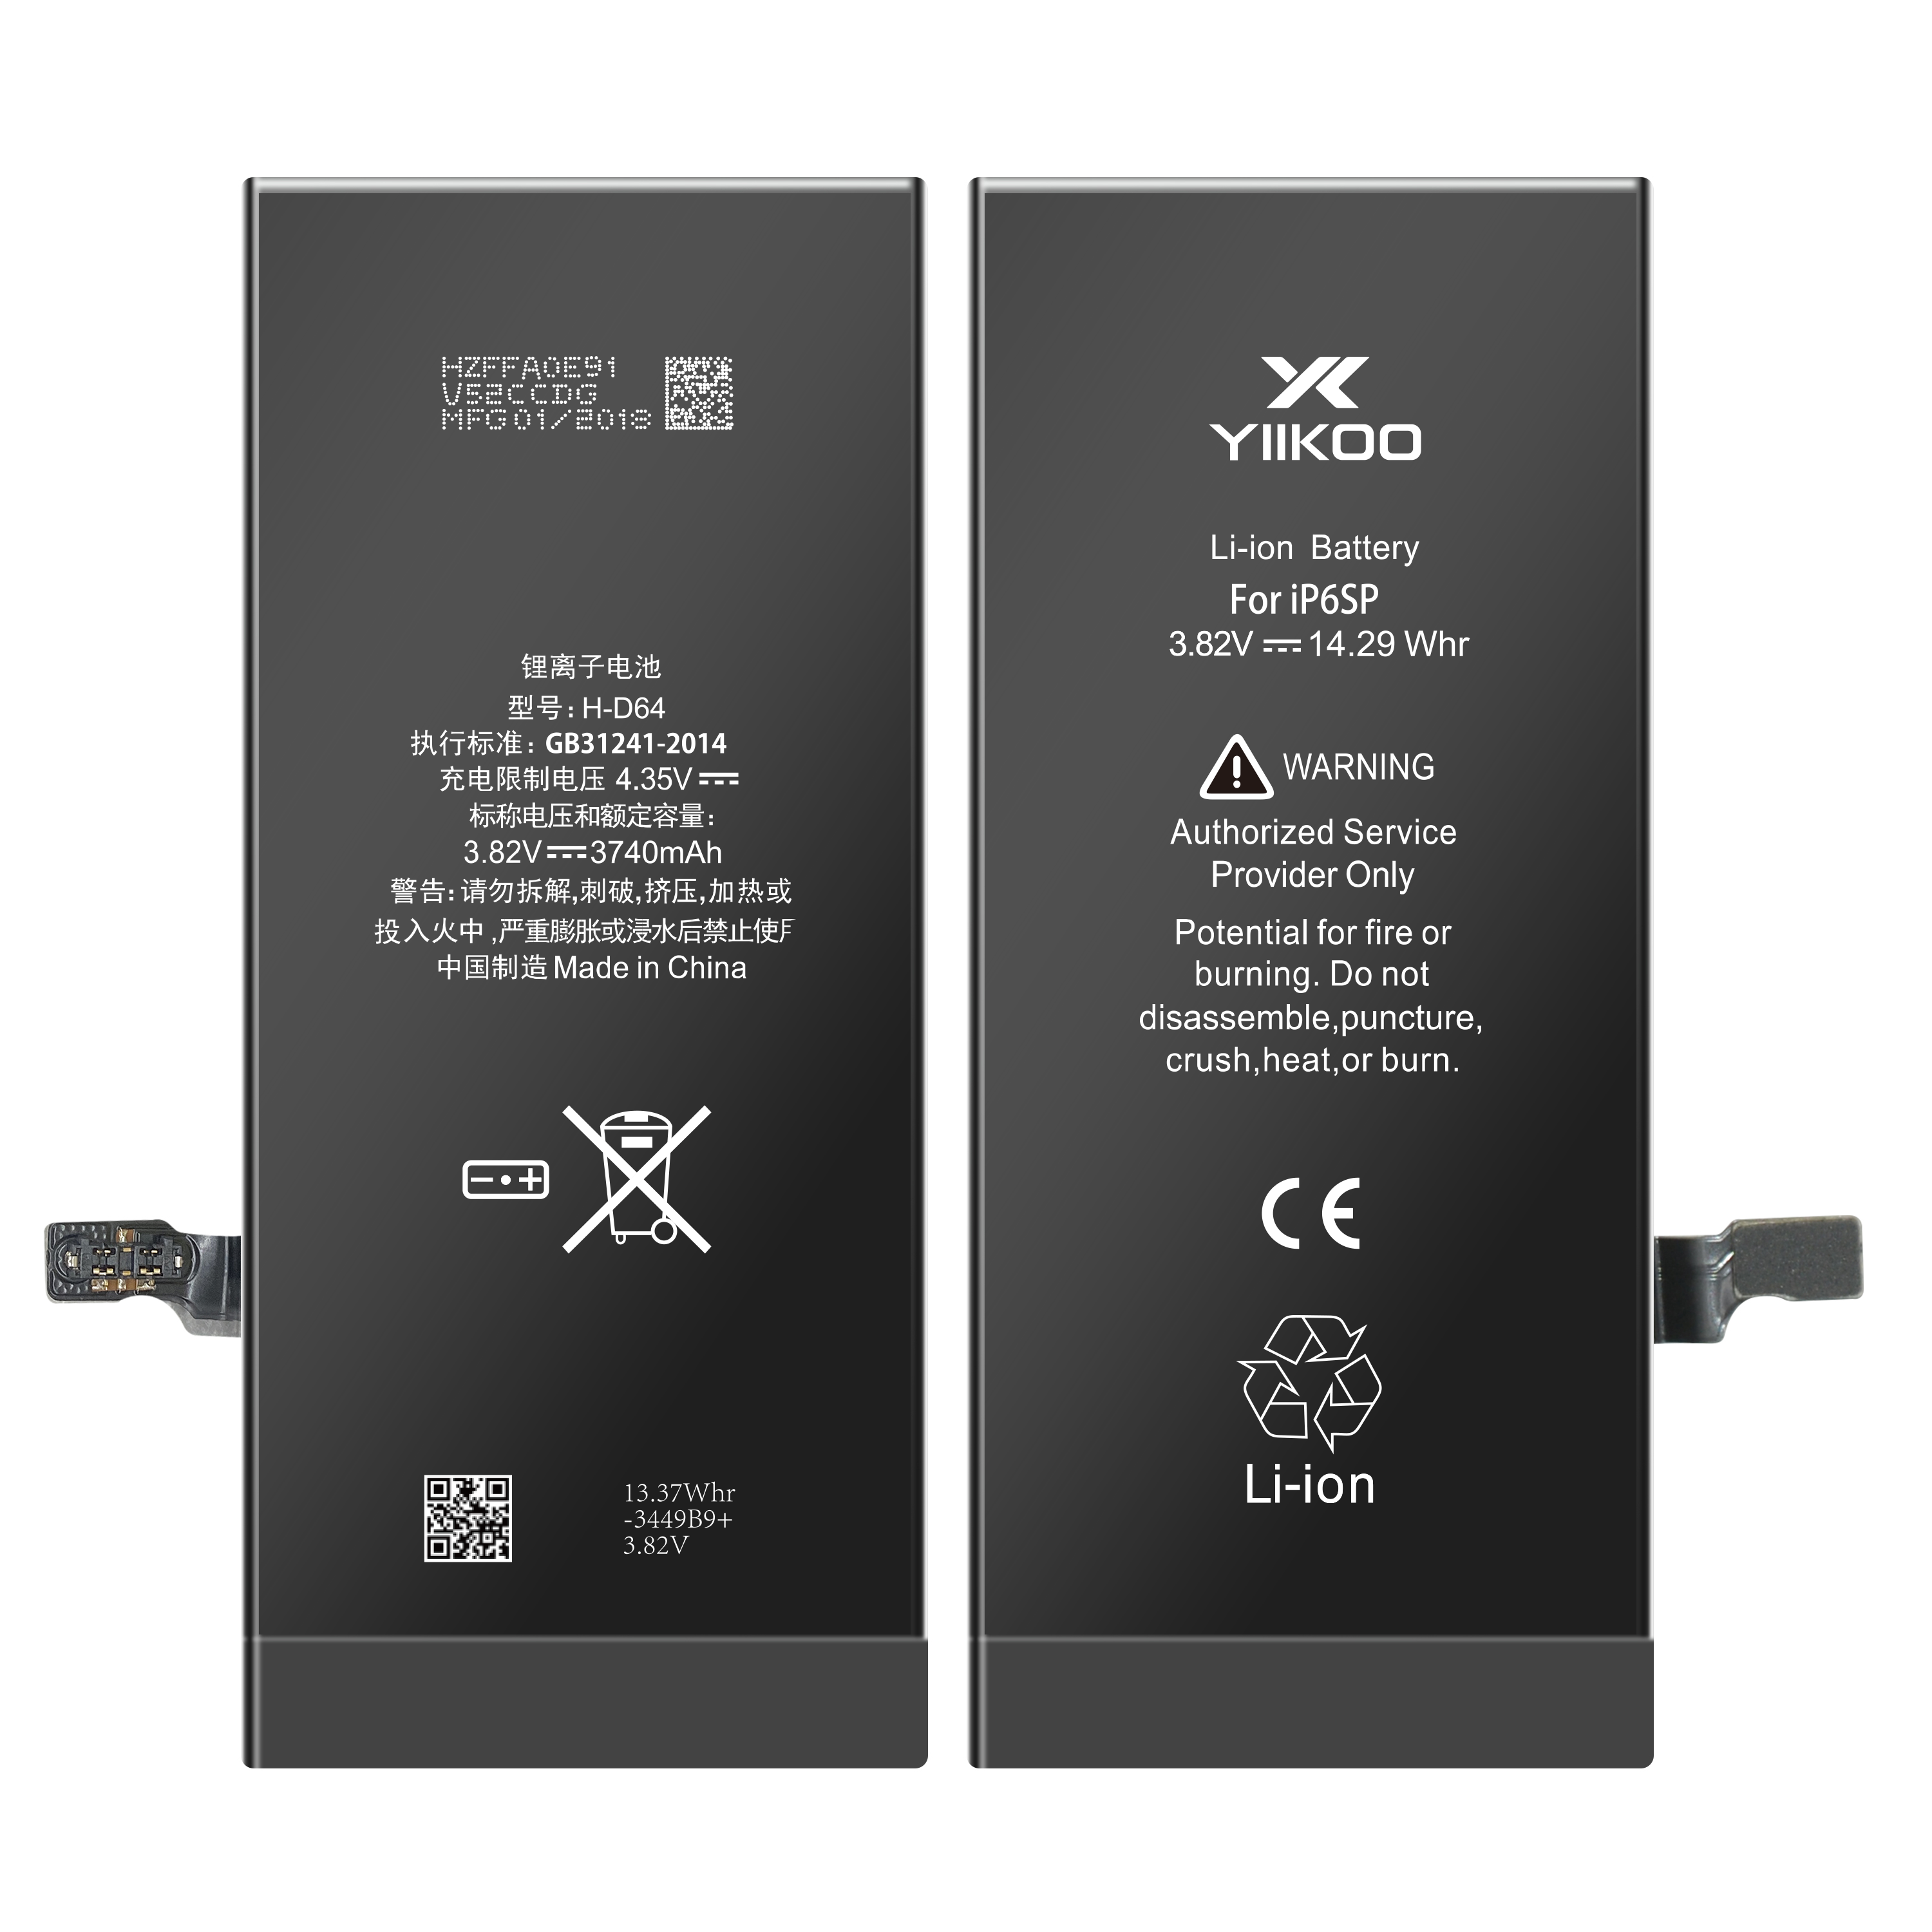 Efficient and Affordable Battery Replacement for Latest Smartphone Model